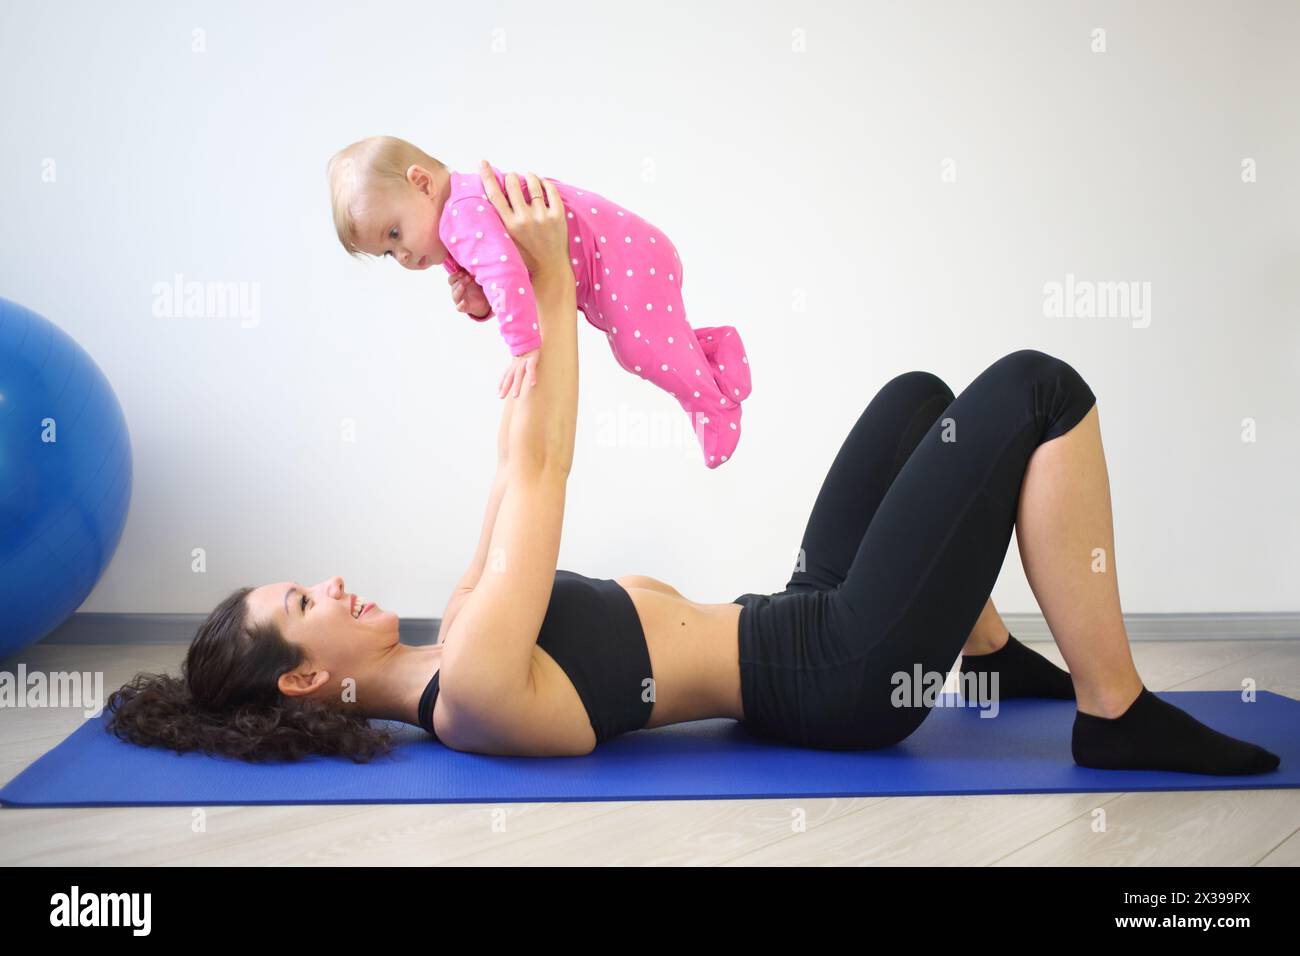 Happy woman lying on her back on the floor lifted up baby in the gym Stock Photo